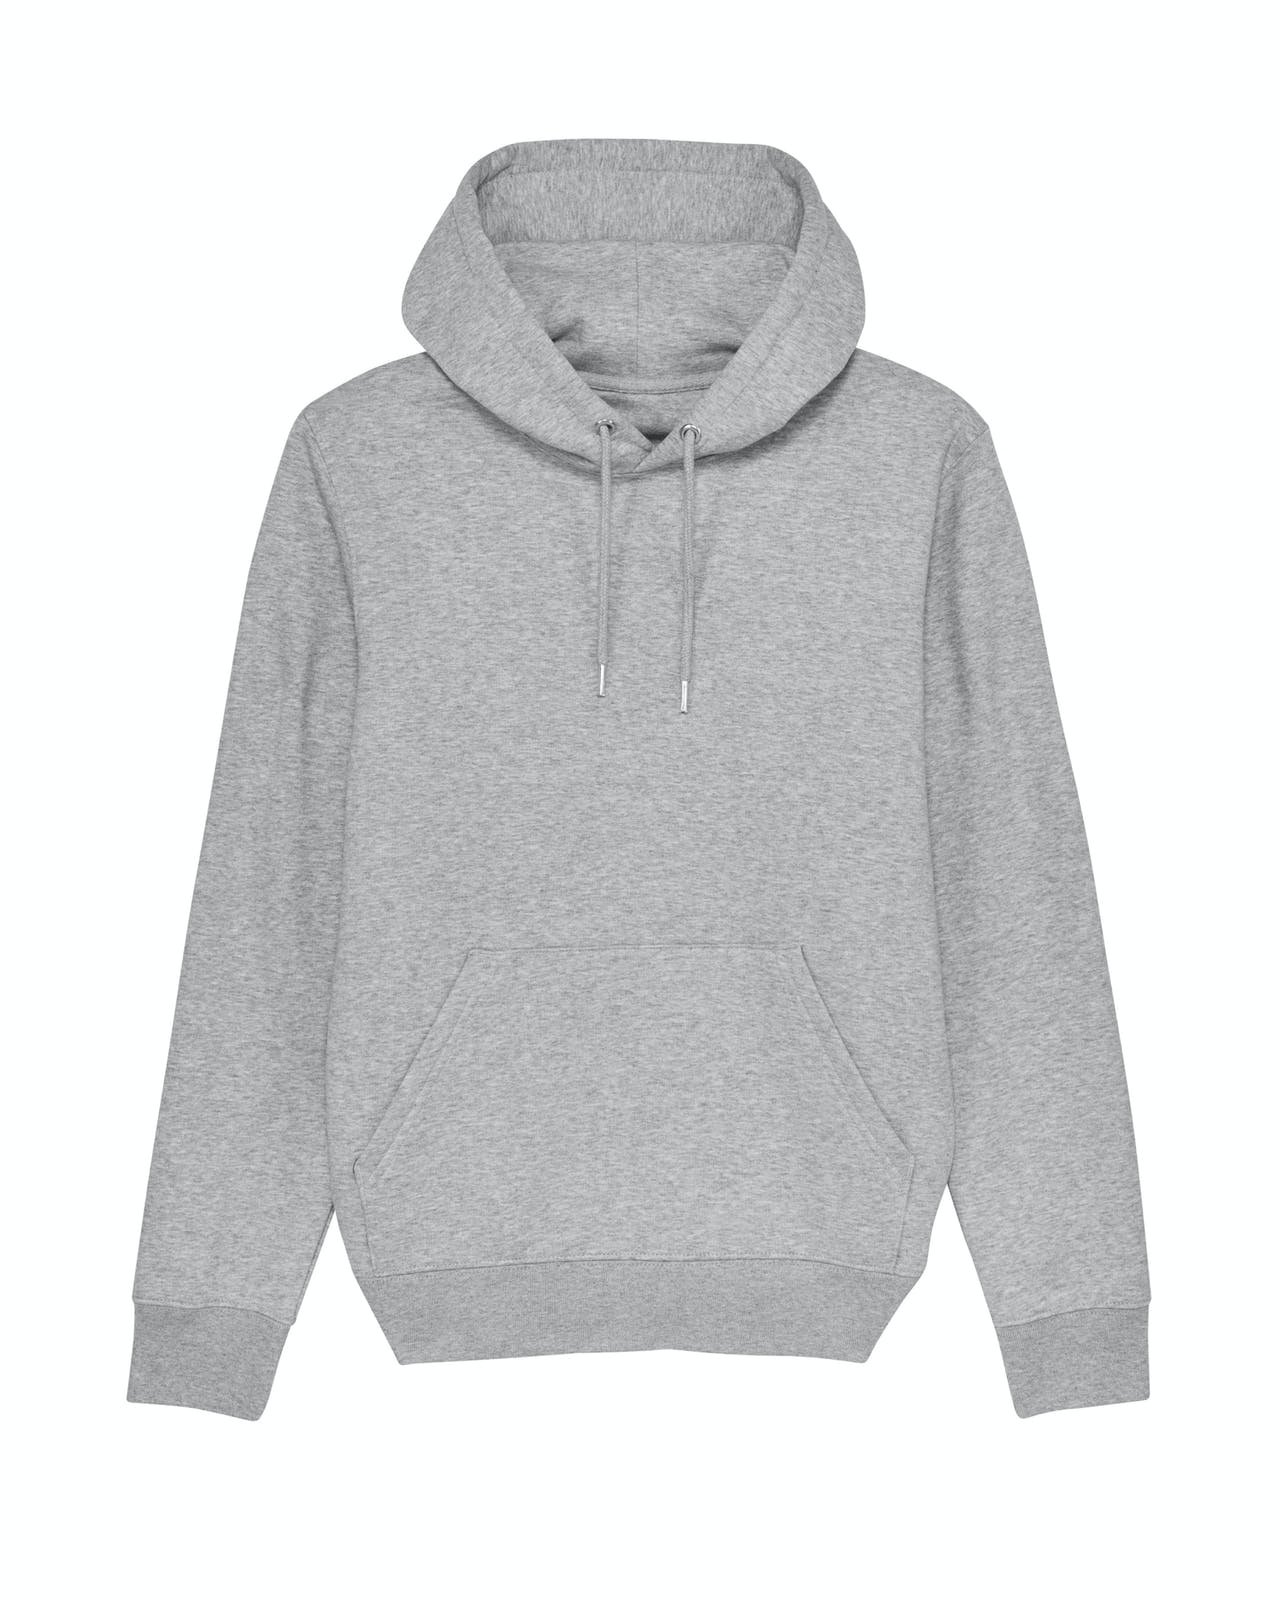 GOAT Apperal Goat Avery Unisex Hooded Sweat Grey